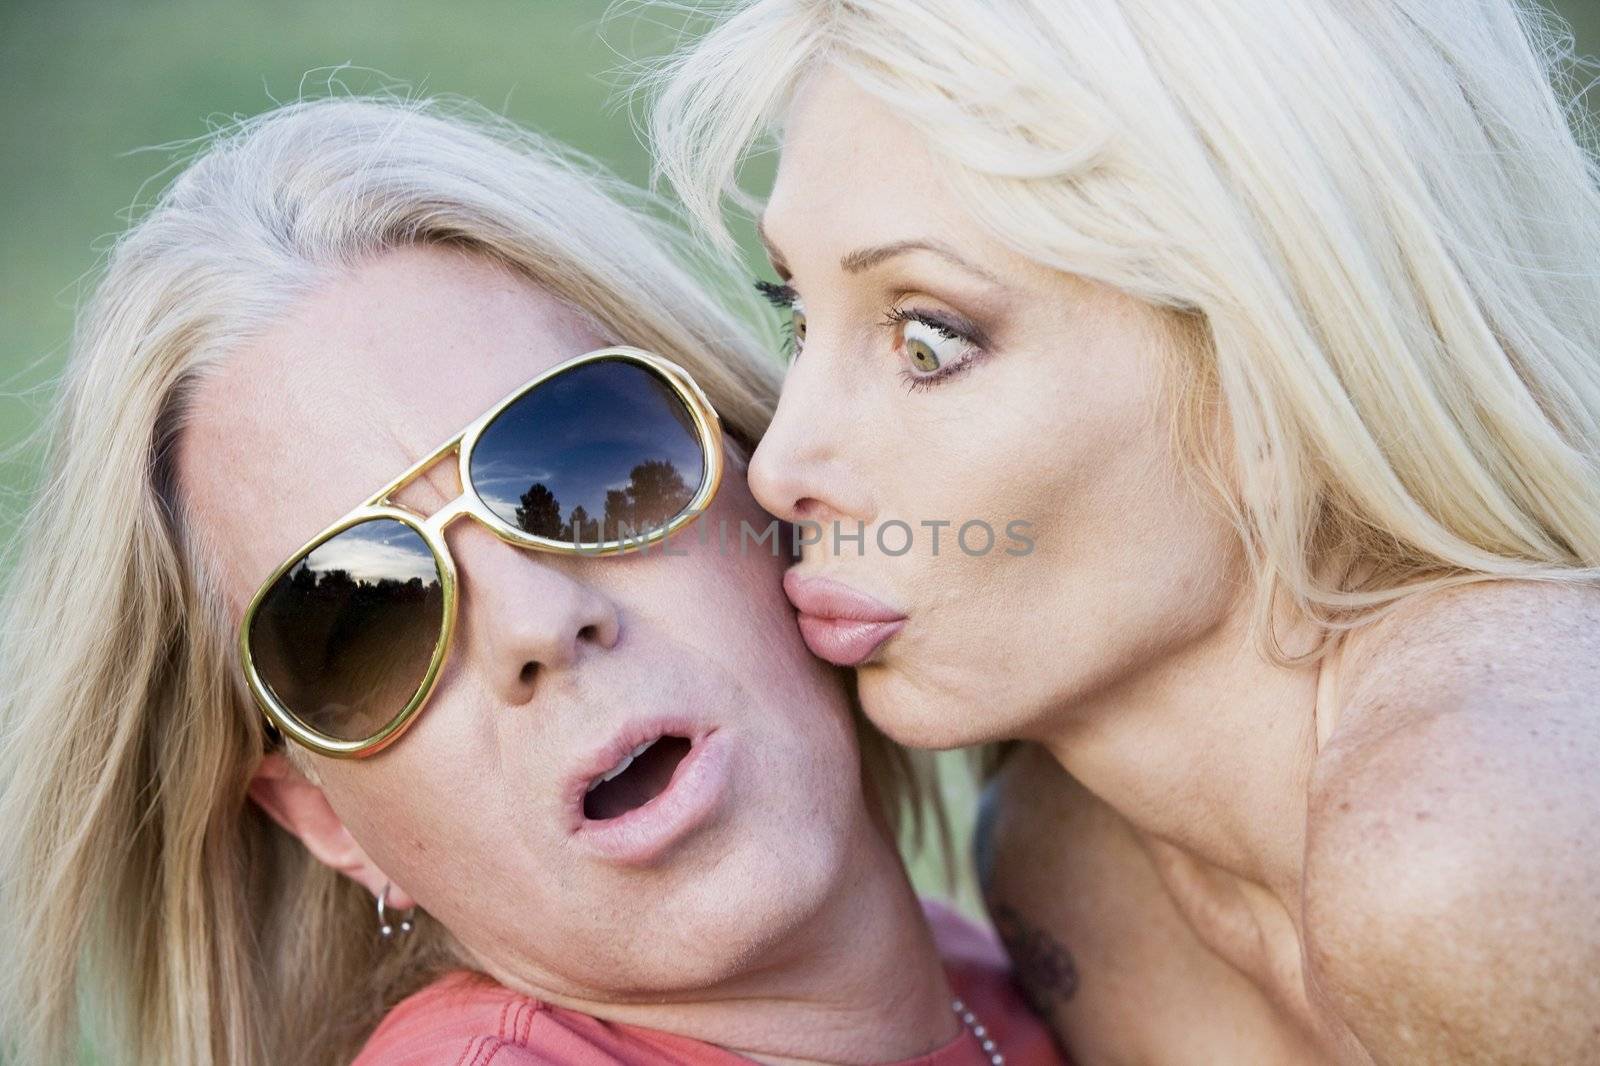 Woman with big eyes kissing a surprised and pleased man